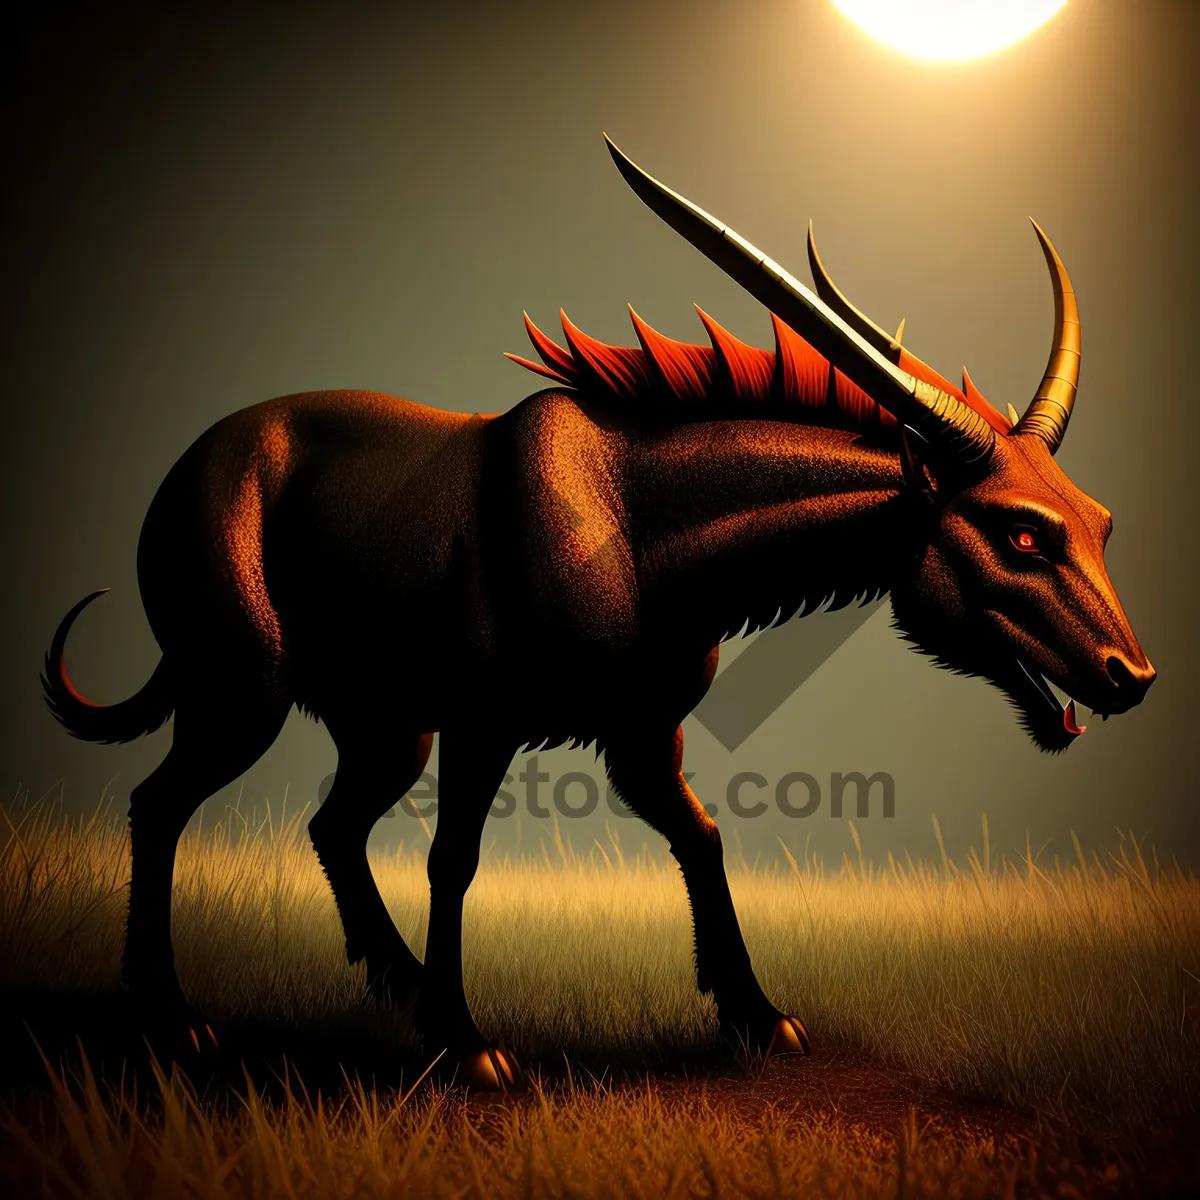 Picture of Sunset Silhouette: Majestic Wild Bull in Twilight Sky